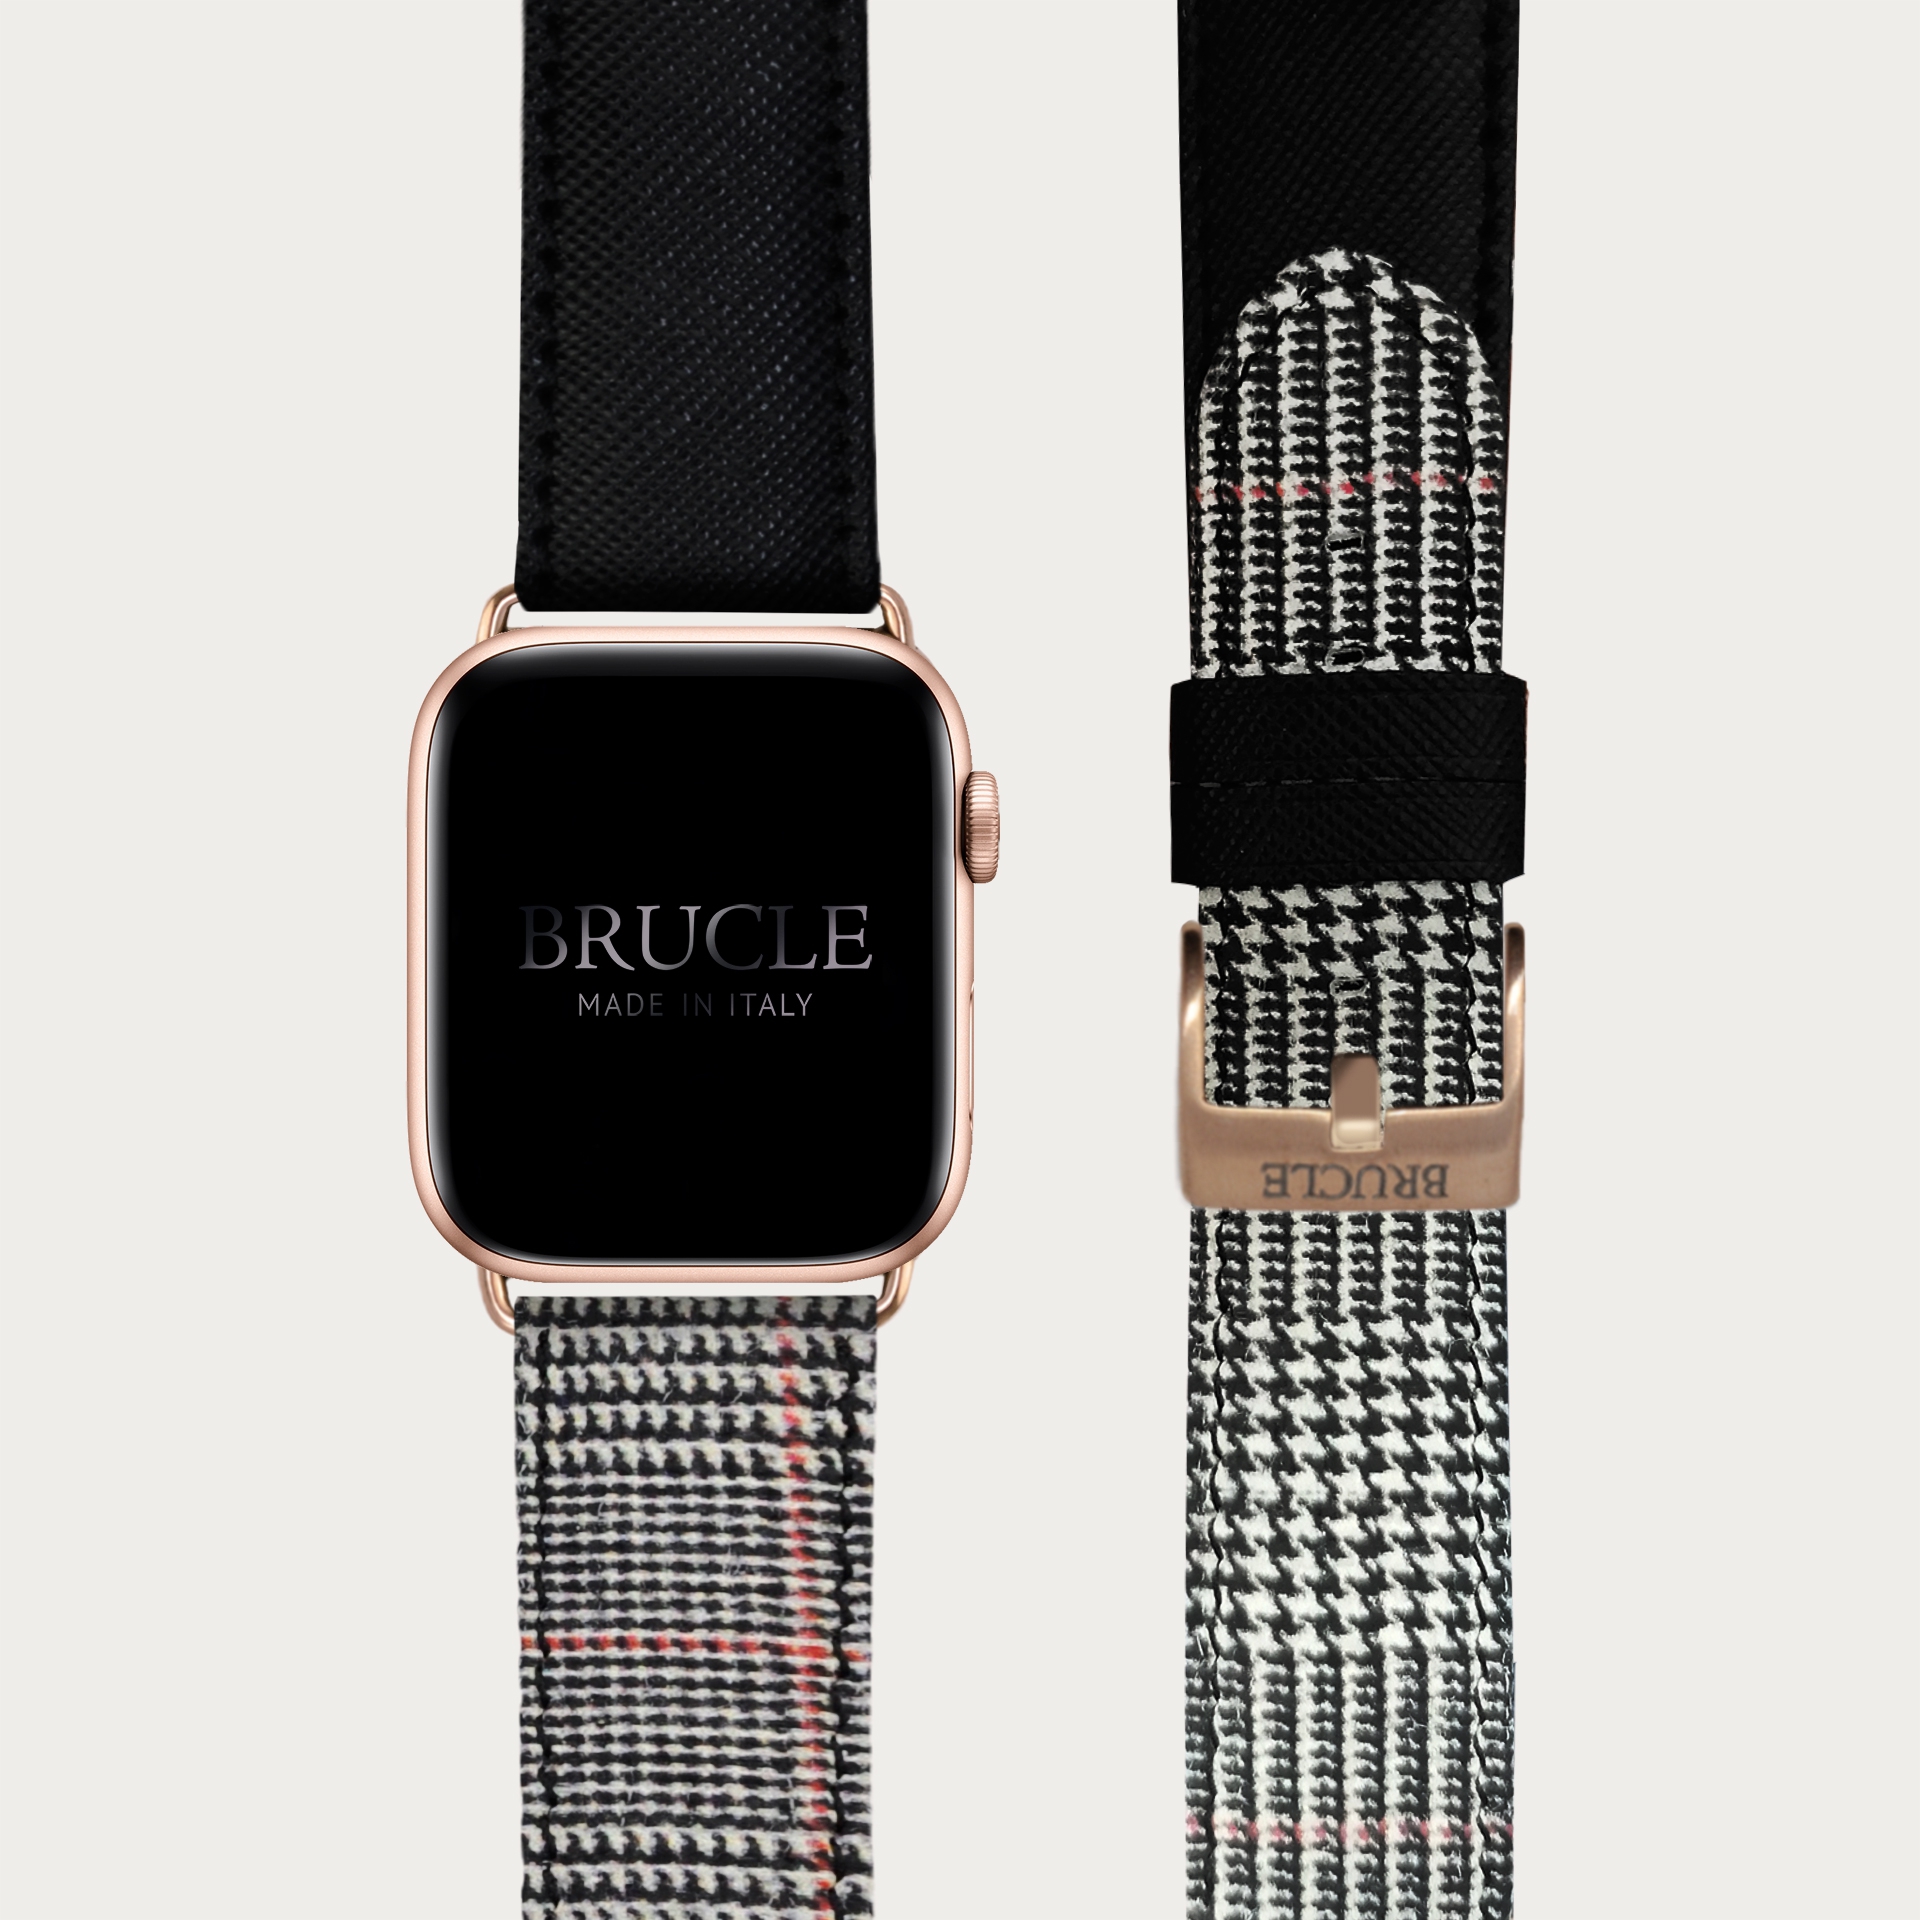 Leather Watch band compatible with Apple Watch / Samsung smartwatch, bicolor black Saffiano print and Wales pattern